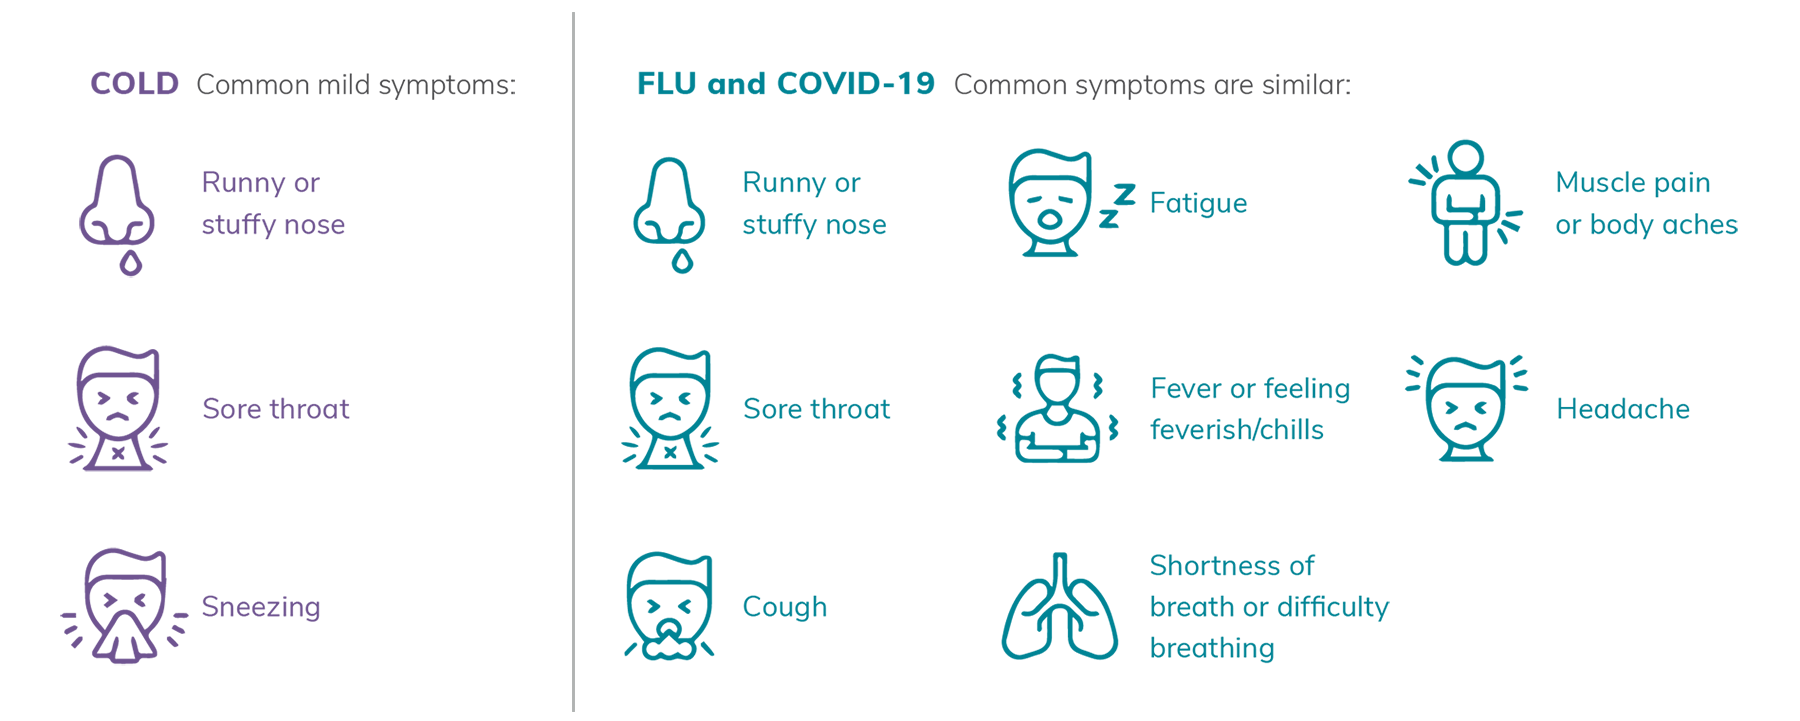 An infographic showing cold, flu and COVID-19 symptoms. Common cold symptoms include: Runny or stuffy nose, sore throat, and sneezing. Flu and COVID-19 common symptoms are similar and may include runny or stuffy nose, sore throat, cough, fatigue, fever or feeling feverish/chills, shortness of breath or difficulty breathing, muscle pain or body aches, and headache.